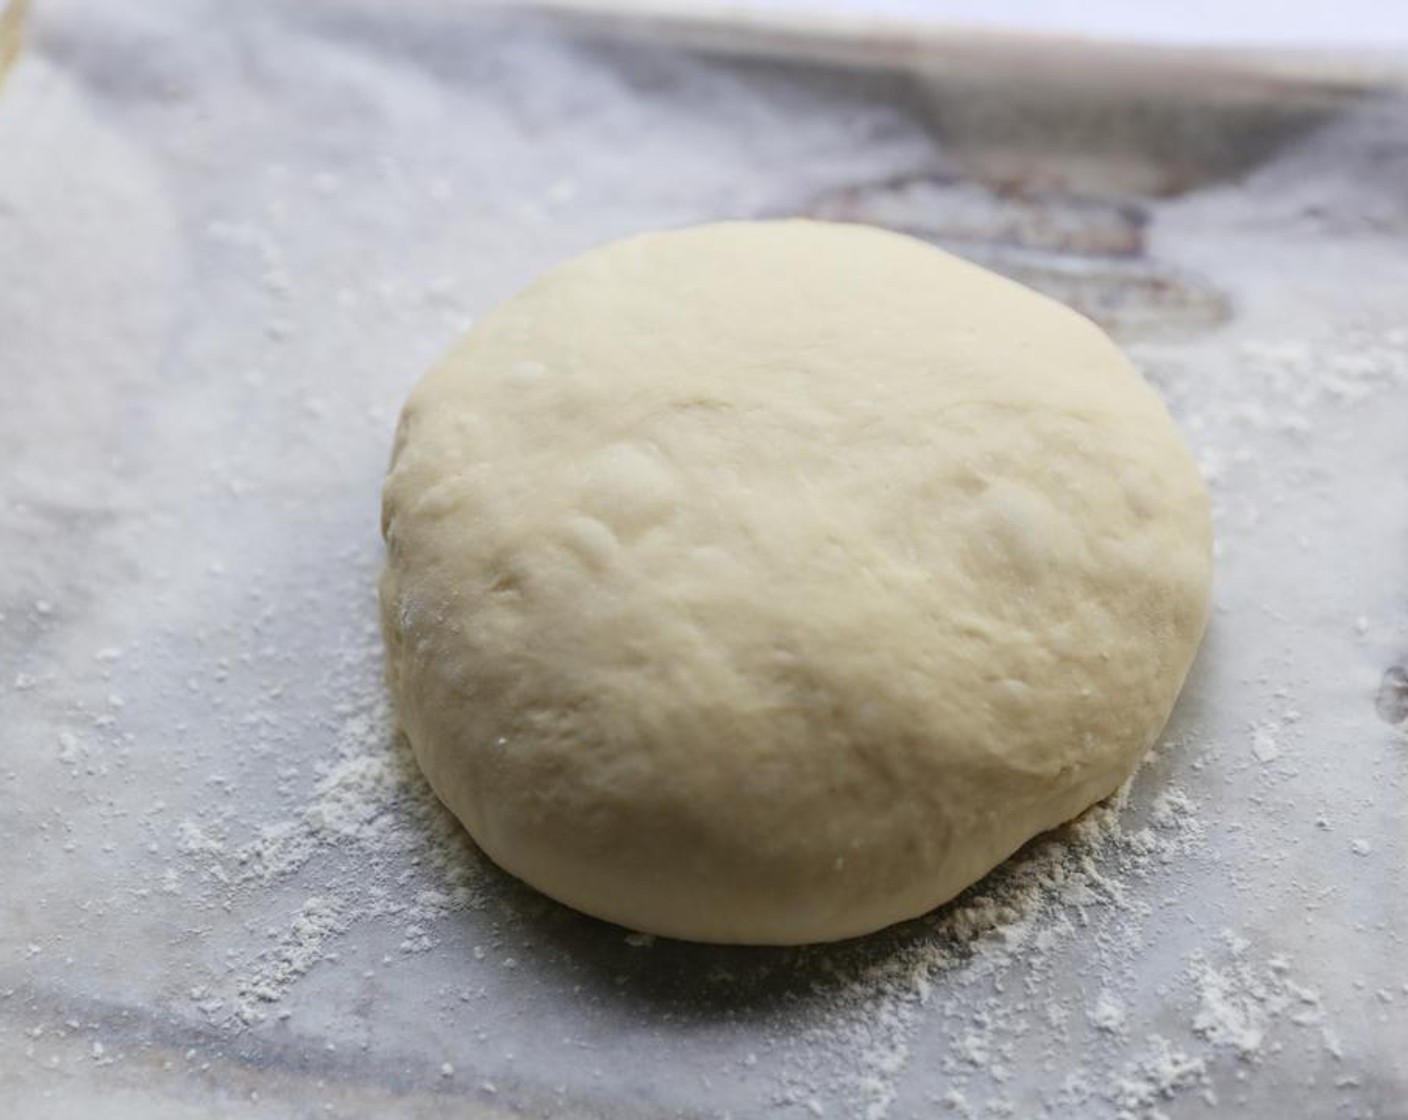 step 6 Knock the dough down gently and shape into a round ball. Place on a floured baking tray and allow to prove for another hour.